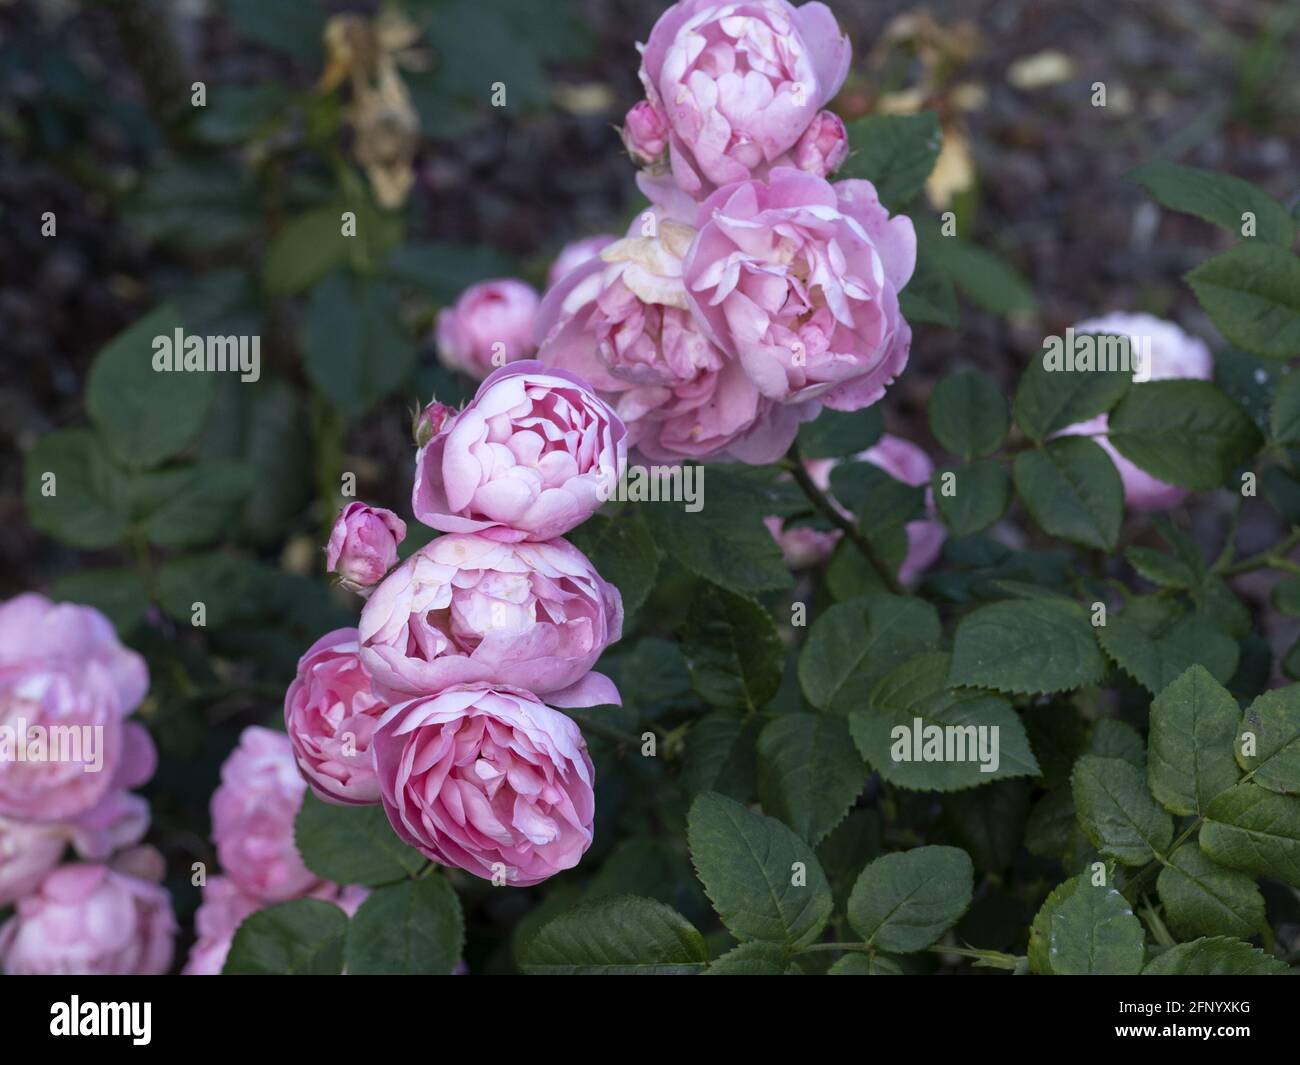 Rare rose flower at cultivation garden macro close up species Raubritter Stock Photo